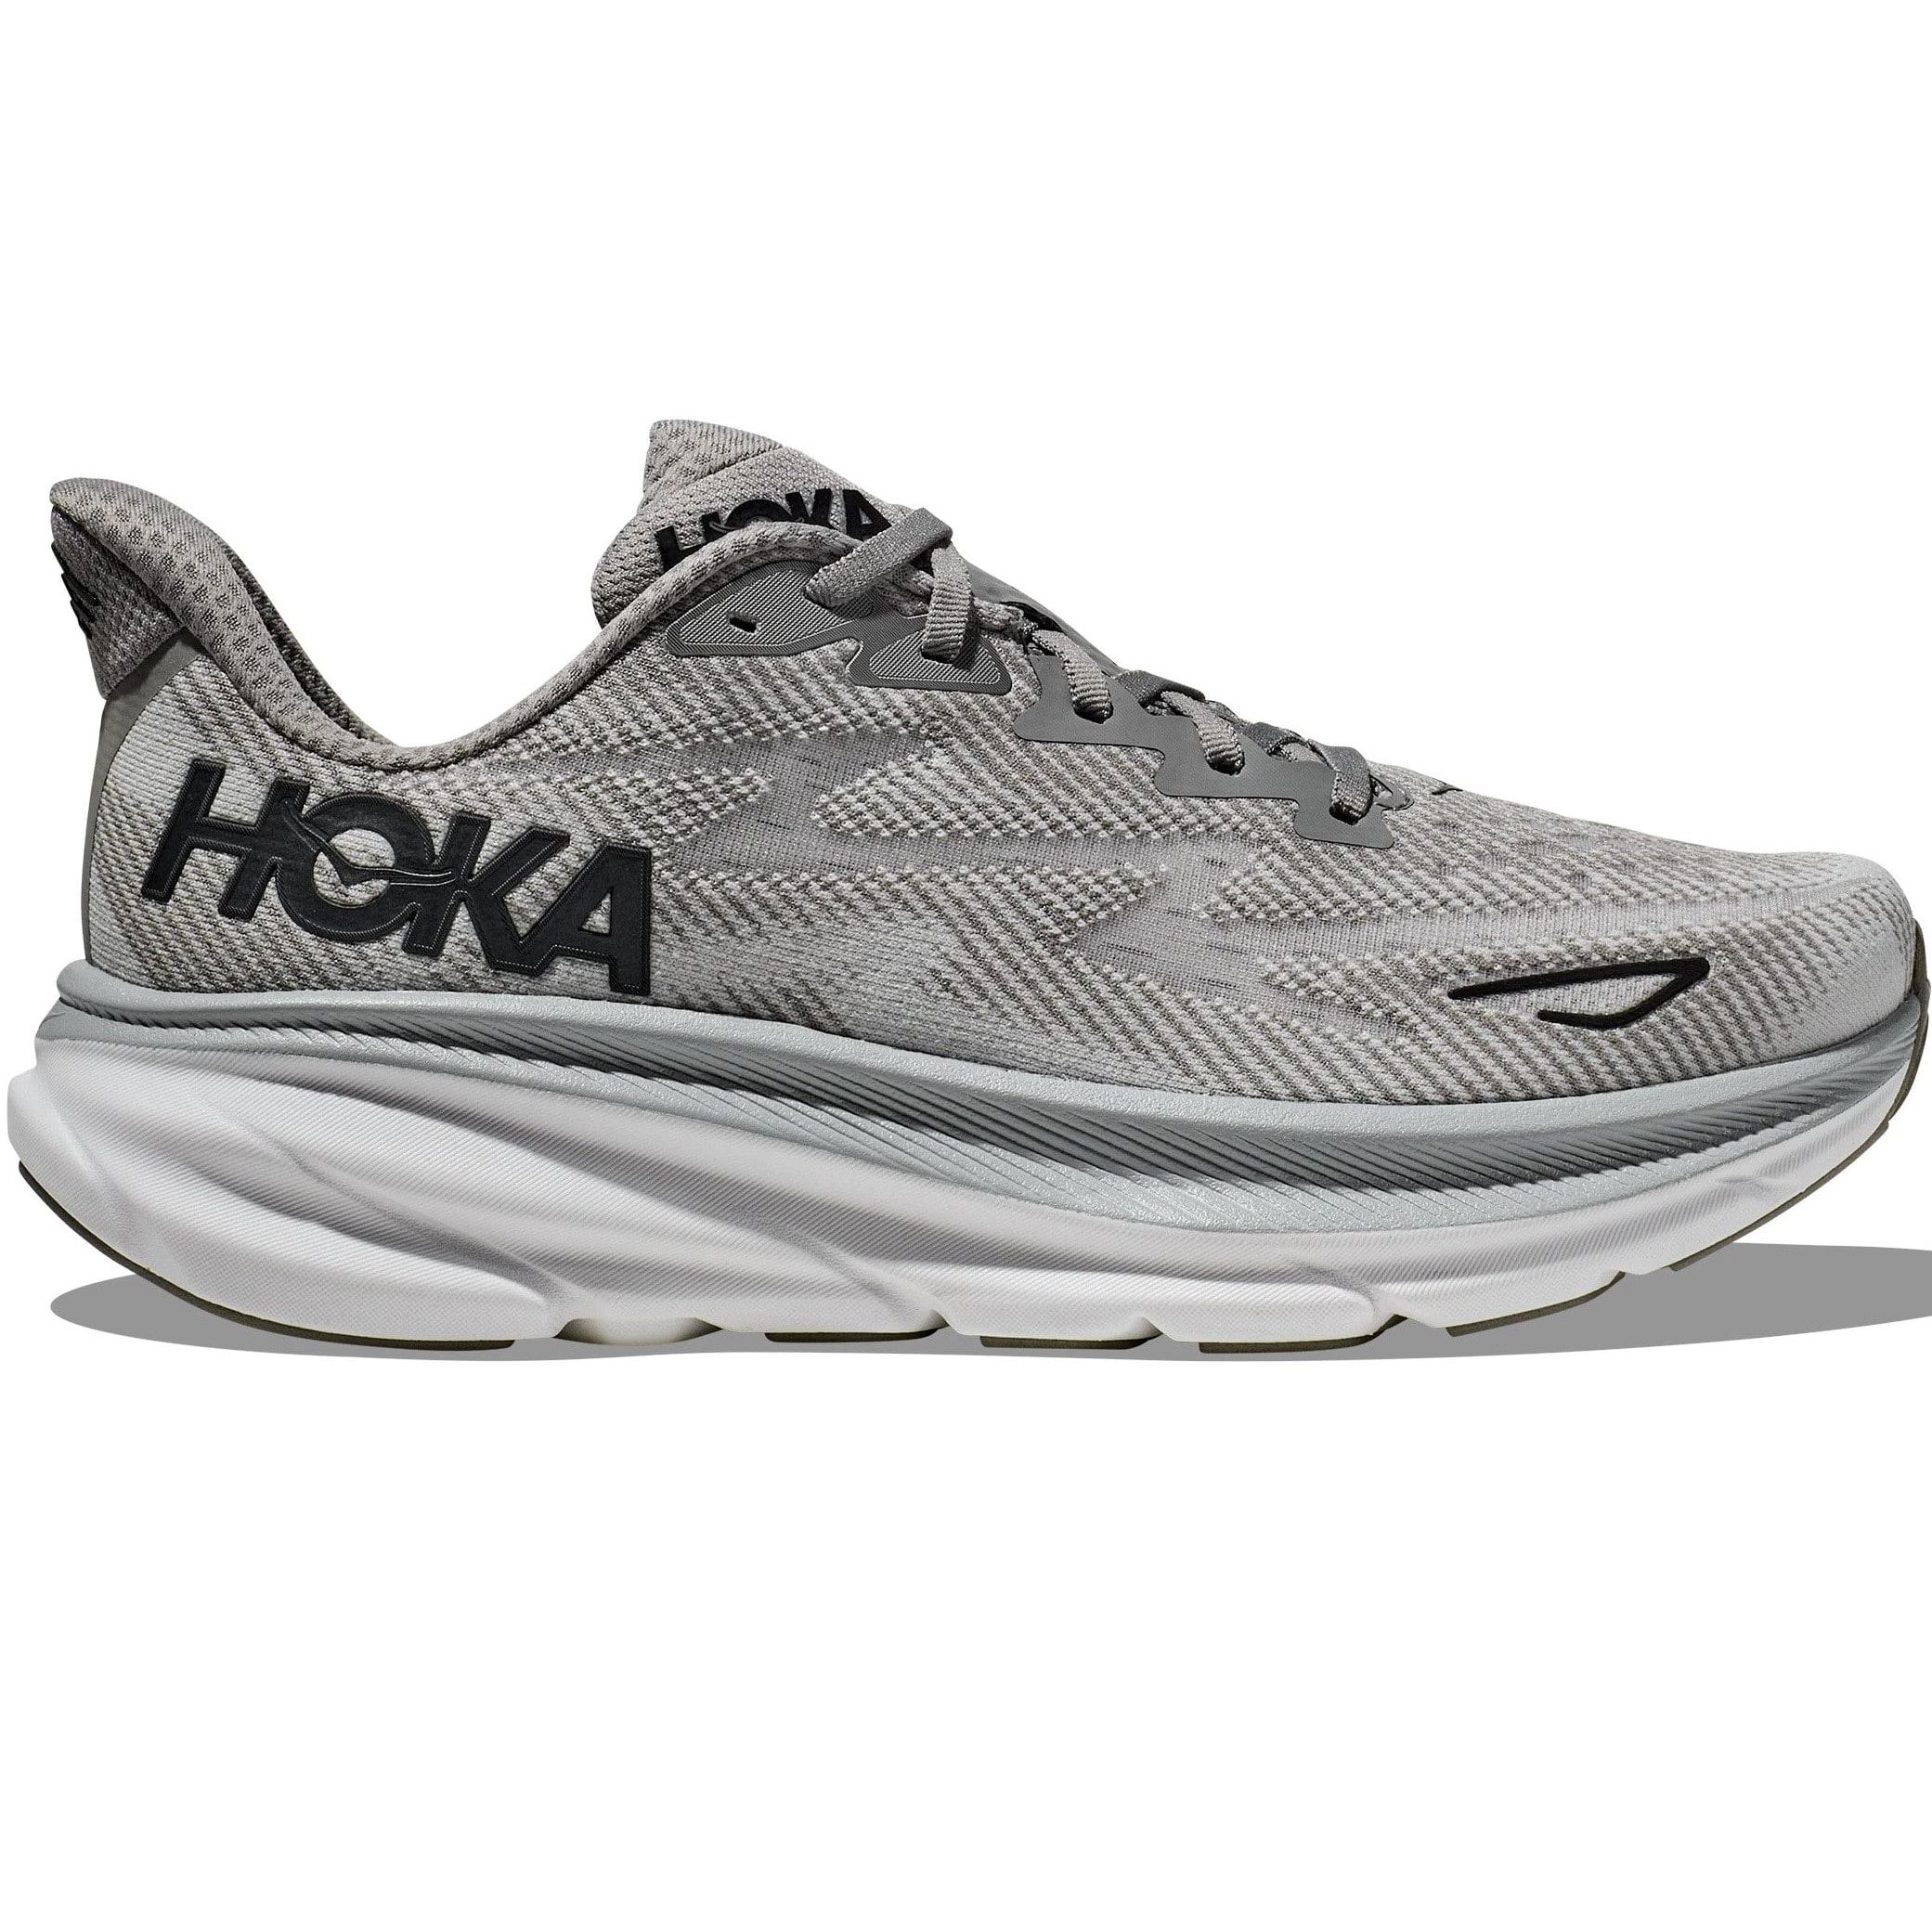 GIÀY THỂ THAO HOKA NAM HARBOR MIST CLIFTON 9 WIDE EVERYDAY RUNNING SHOES 196565186485 5